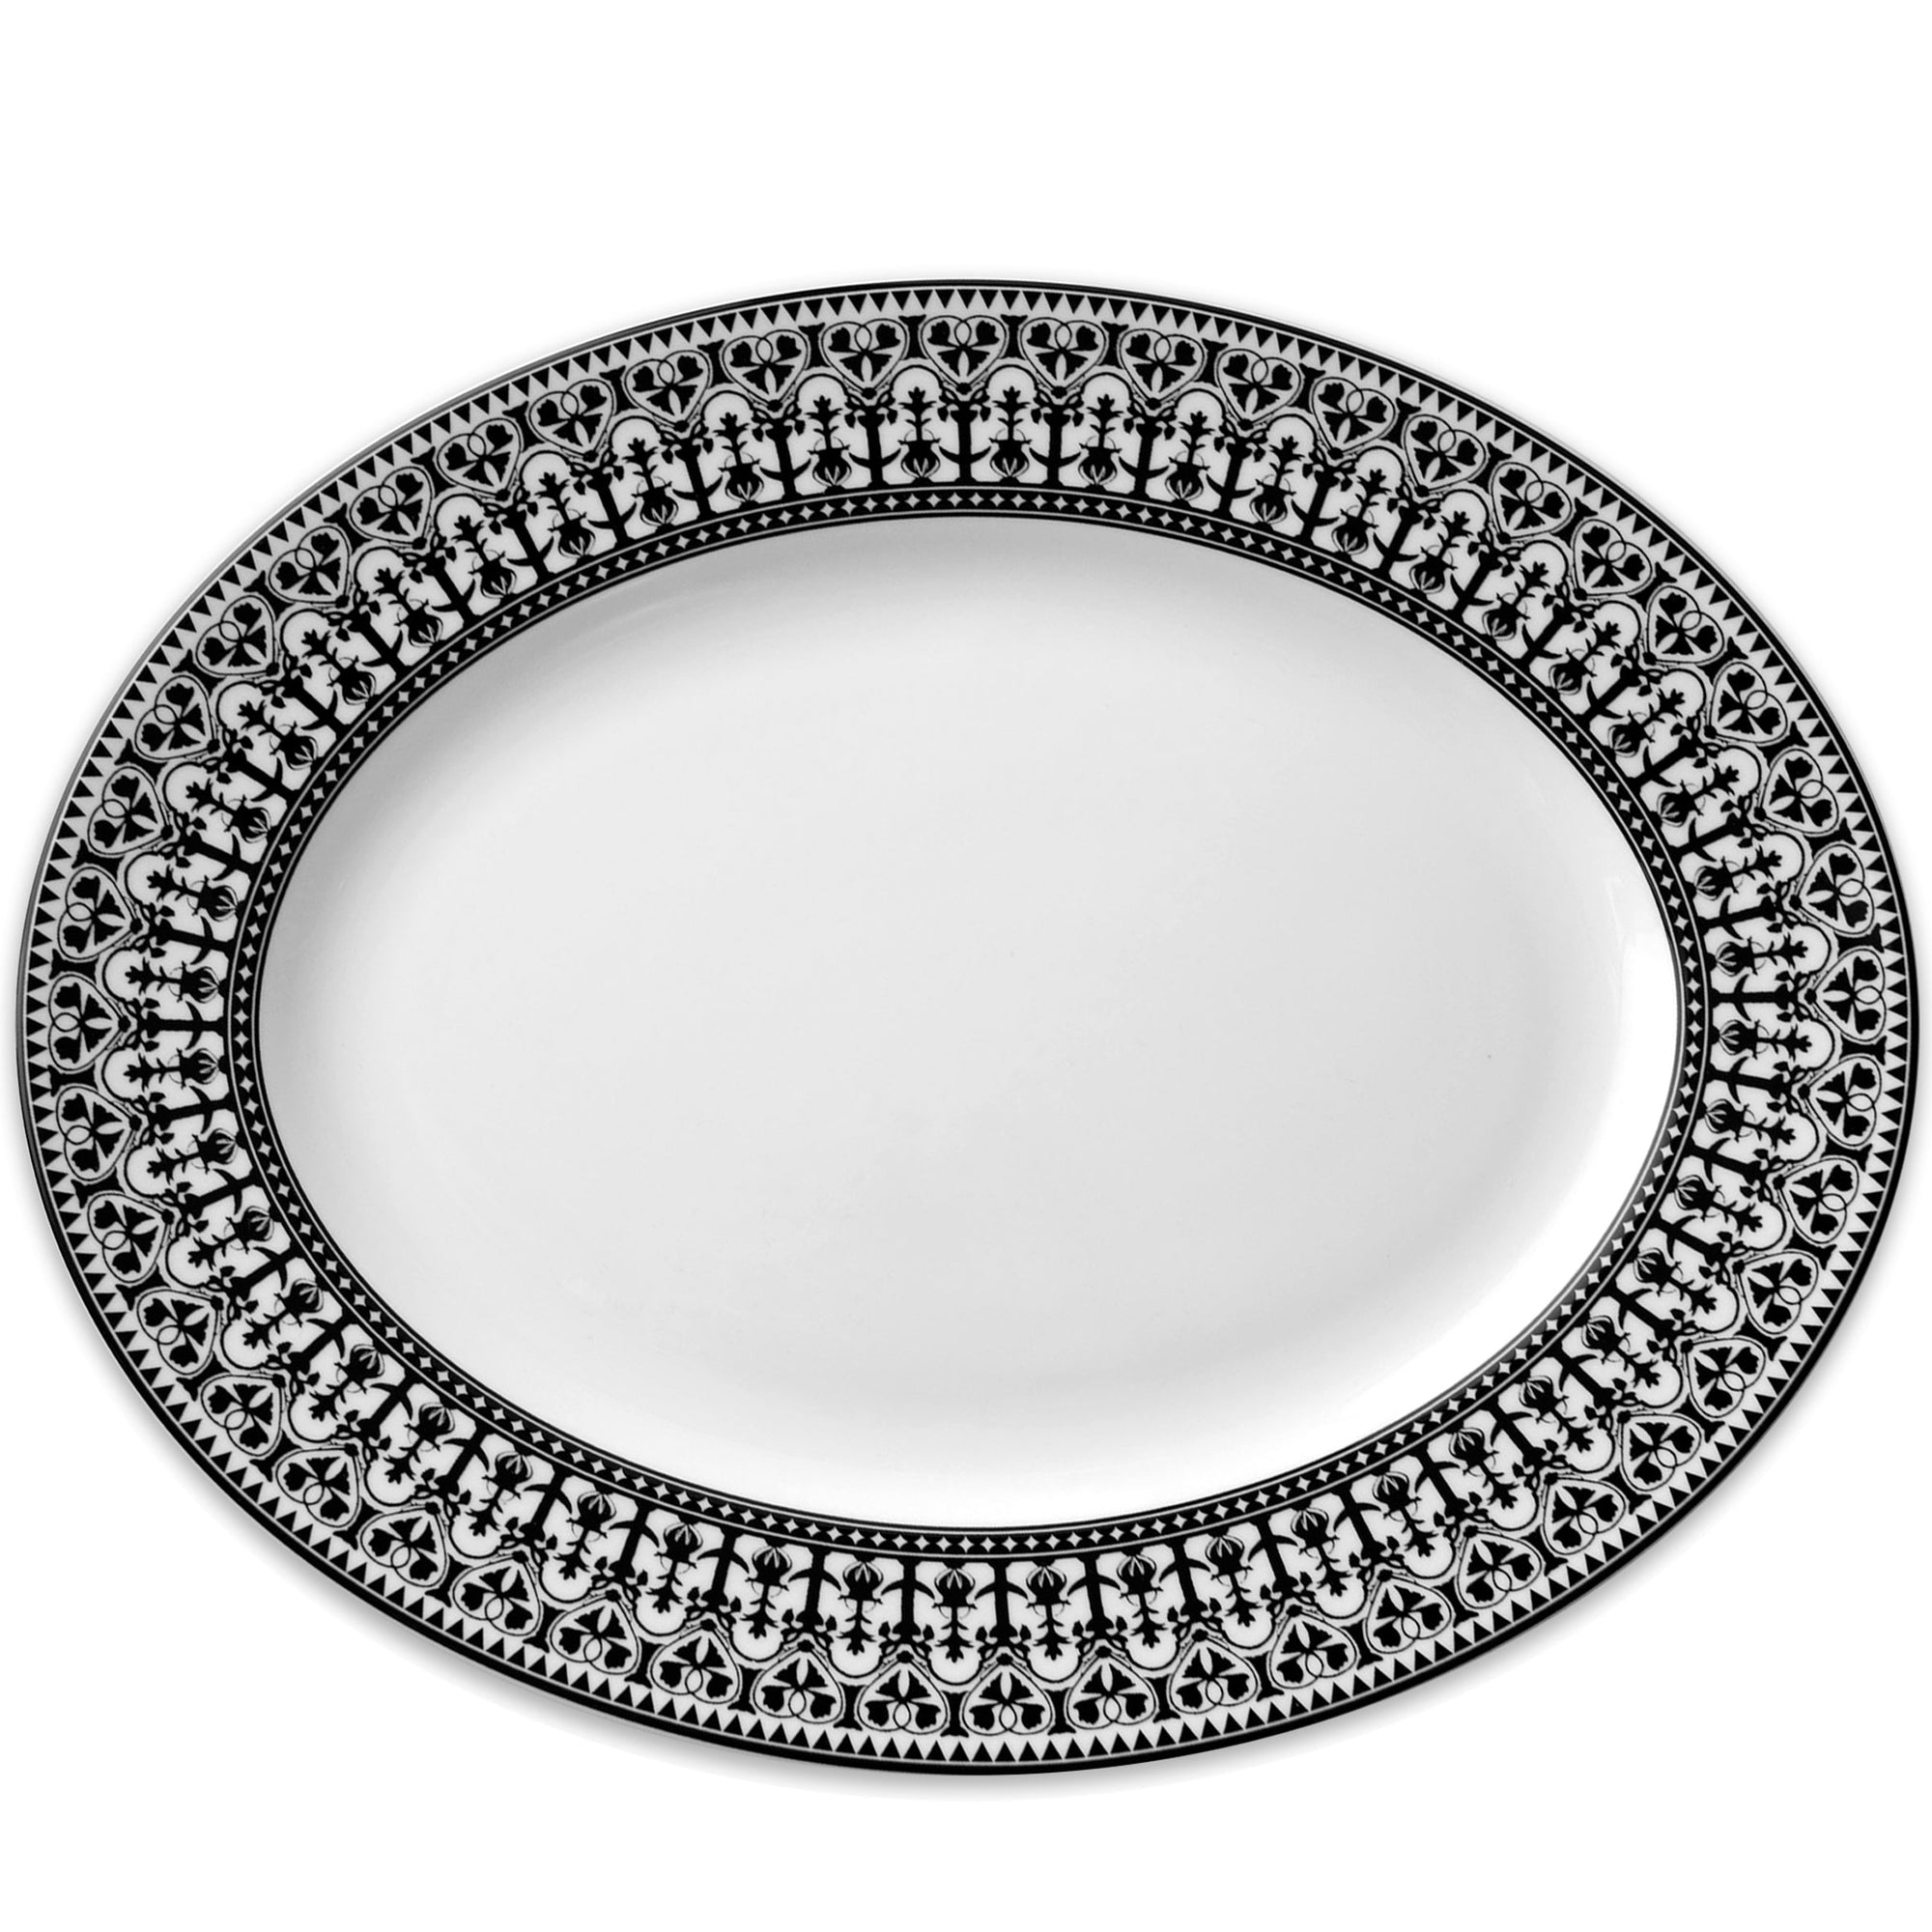 An oval plate with an intricate black and white decorative border, reminiscent of Casablanca dinnerware. The Caskata Artisanal Home Casablanca Oval Rimmed Platter is empty.